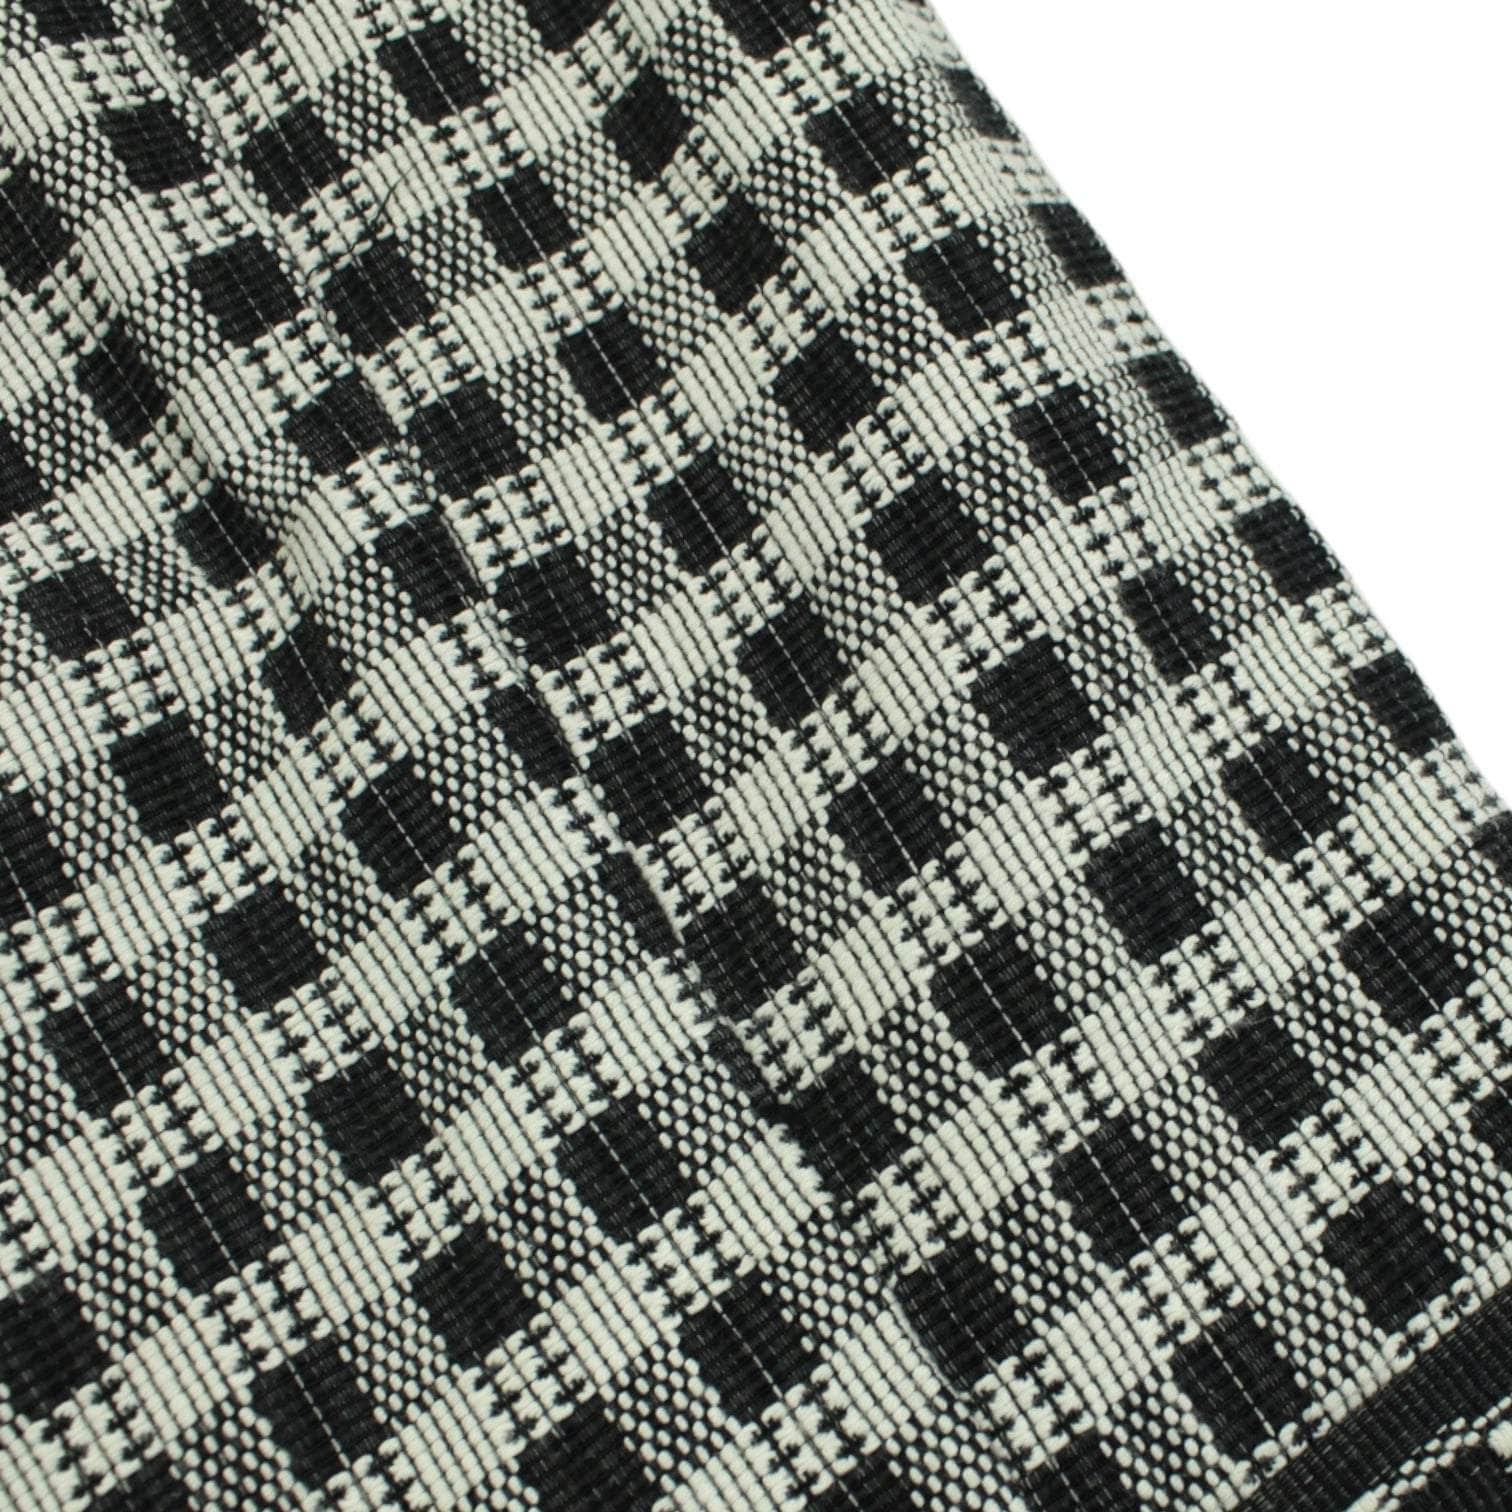 & Other Stories Black & White Check Coat